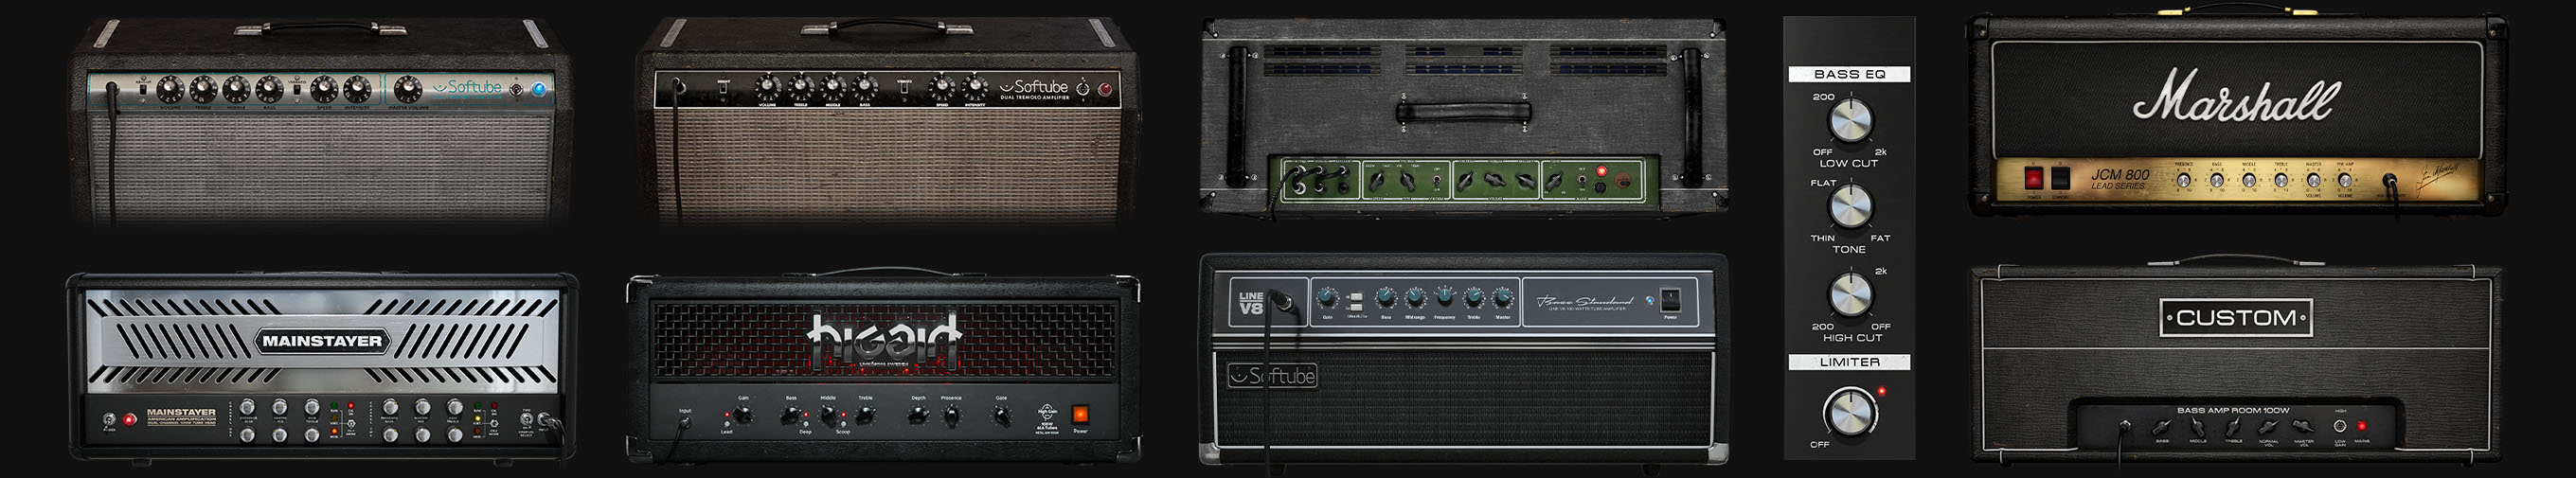 amp-room-1.6-whats-included-amps.jpg